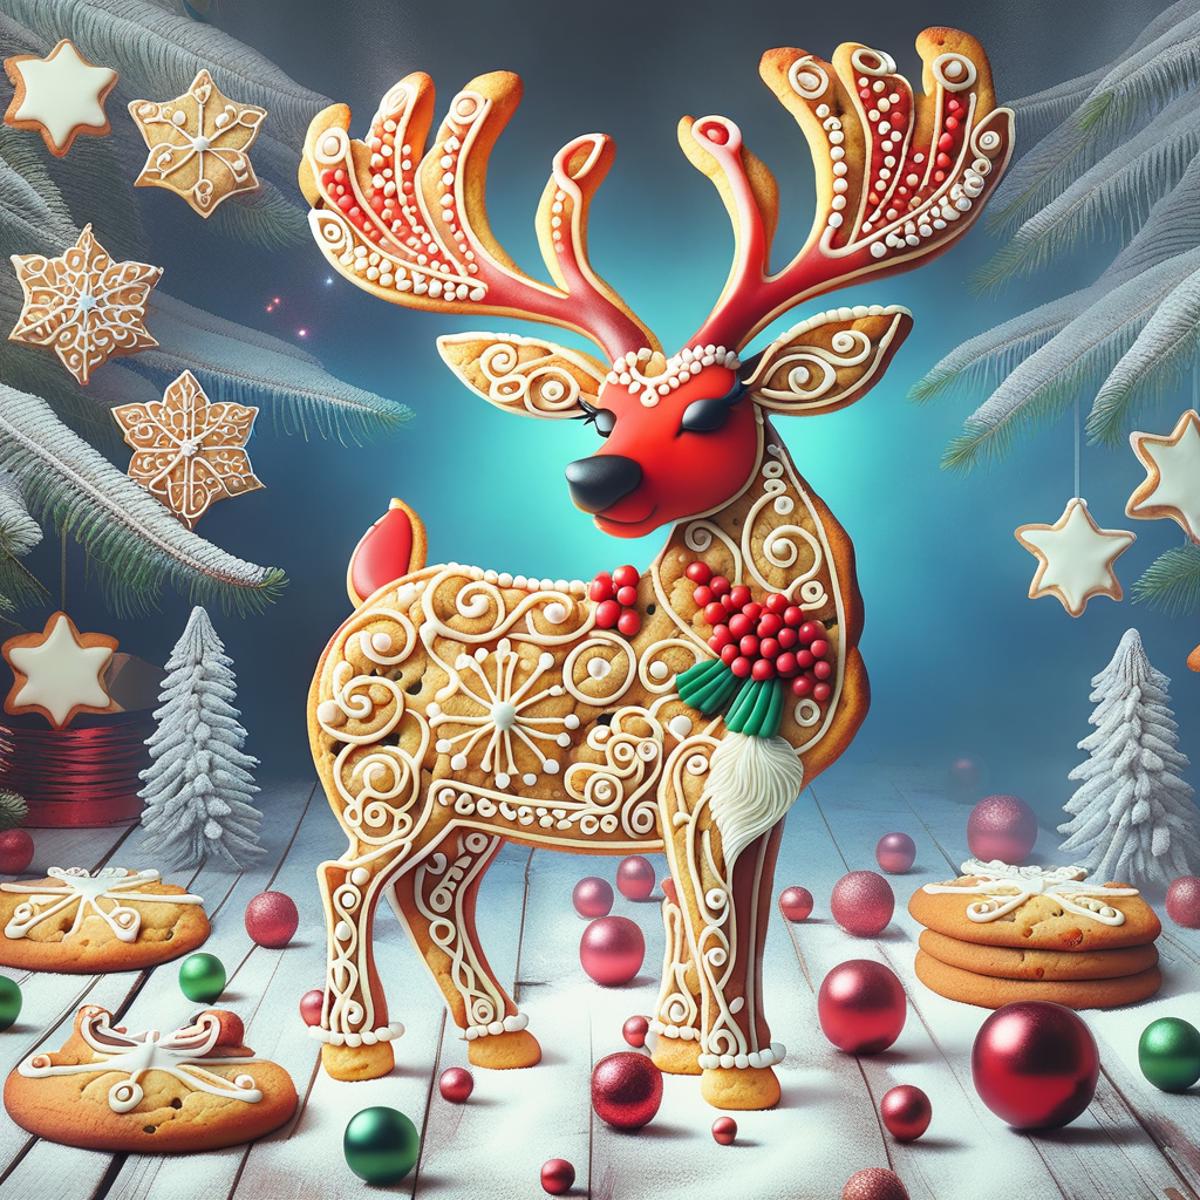 A Christmas-themed scene featuring a reindeer made out of cookies and decorations.